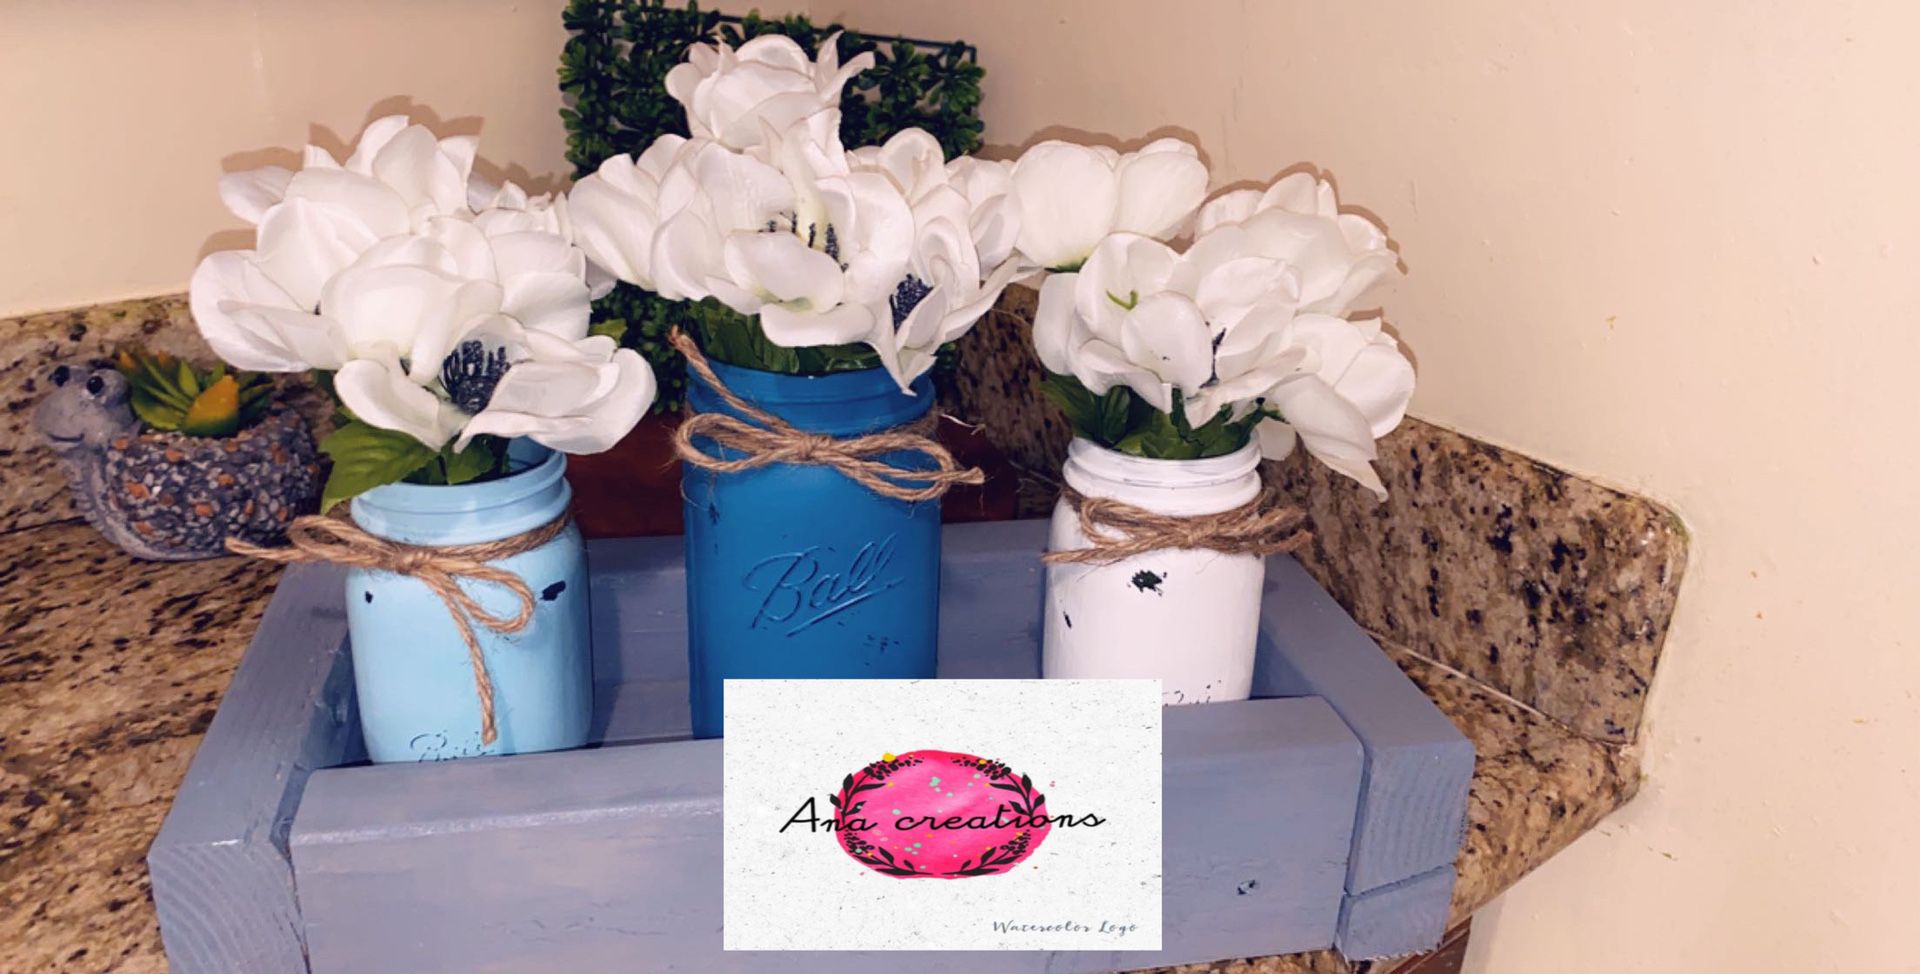 Handcrafted distressed wide-mouth white mason jar vases with/faux greenery or flowers. Made by order 32oz jars